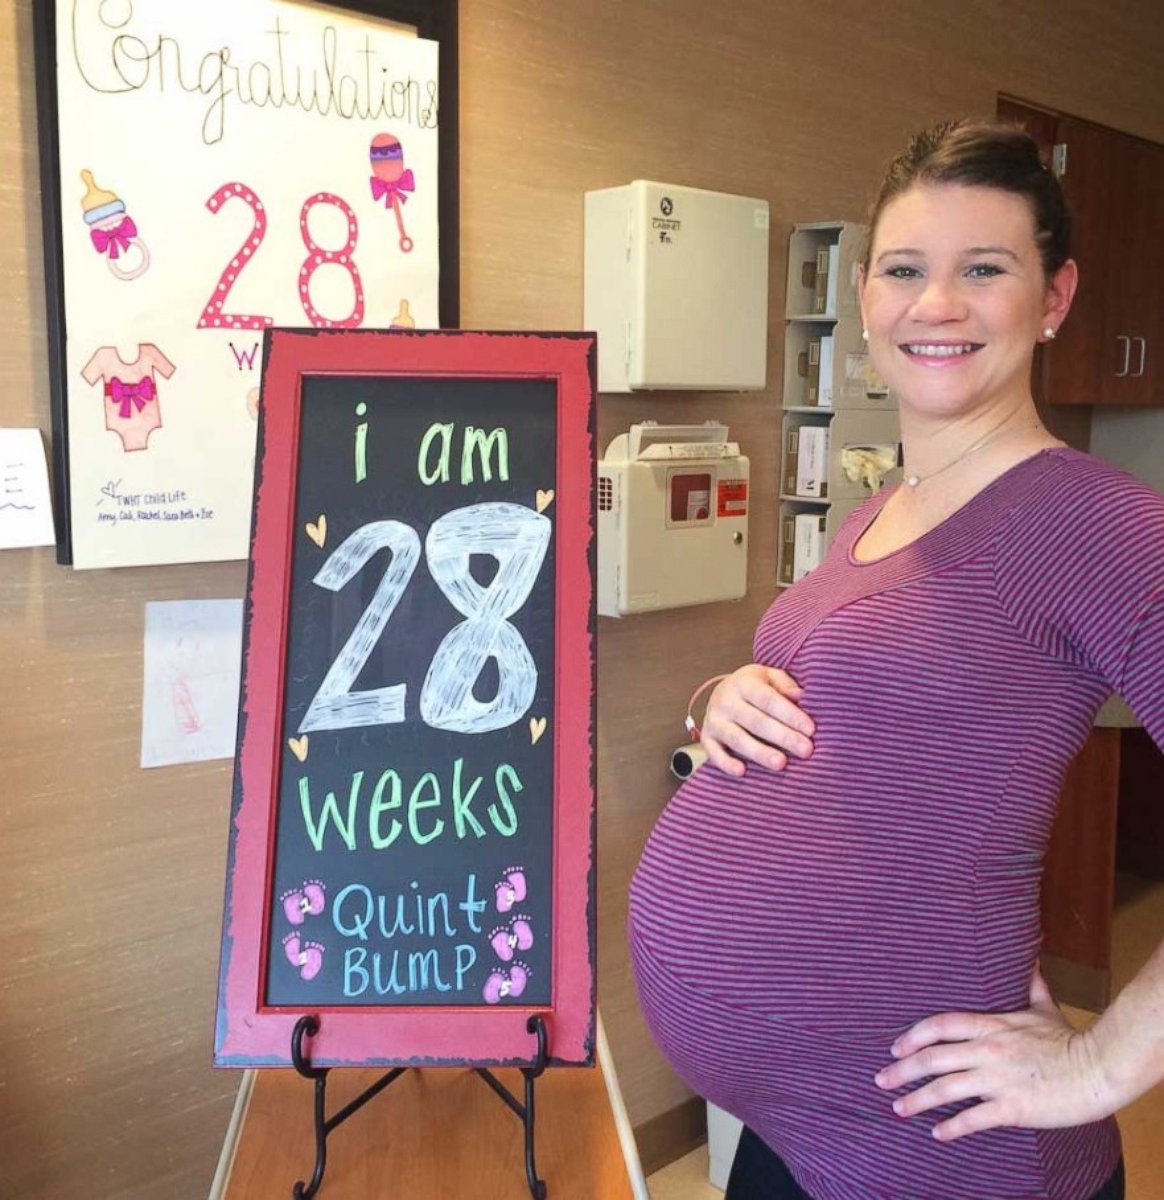 PHOTO: Danielle Busby is seen at 28 weeks of pregnancy in this photo posted to her blog. 